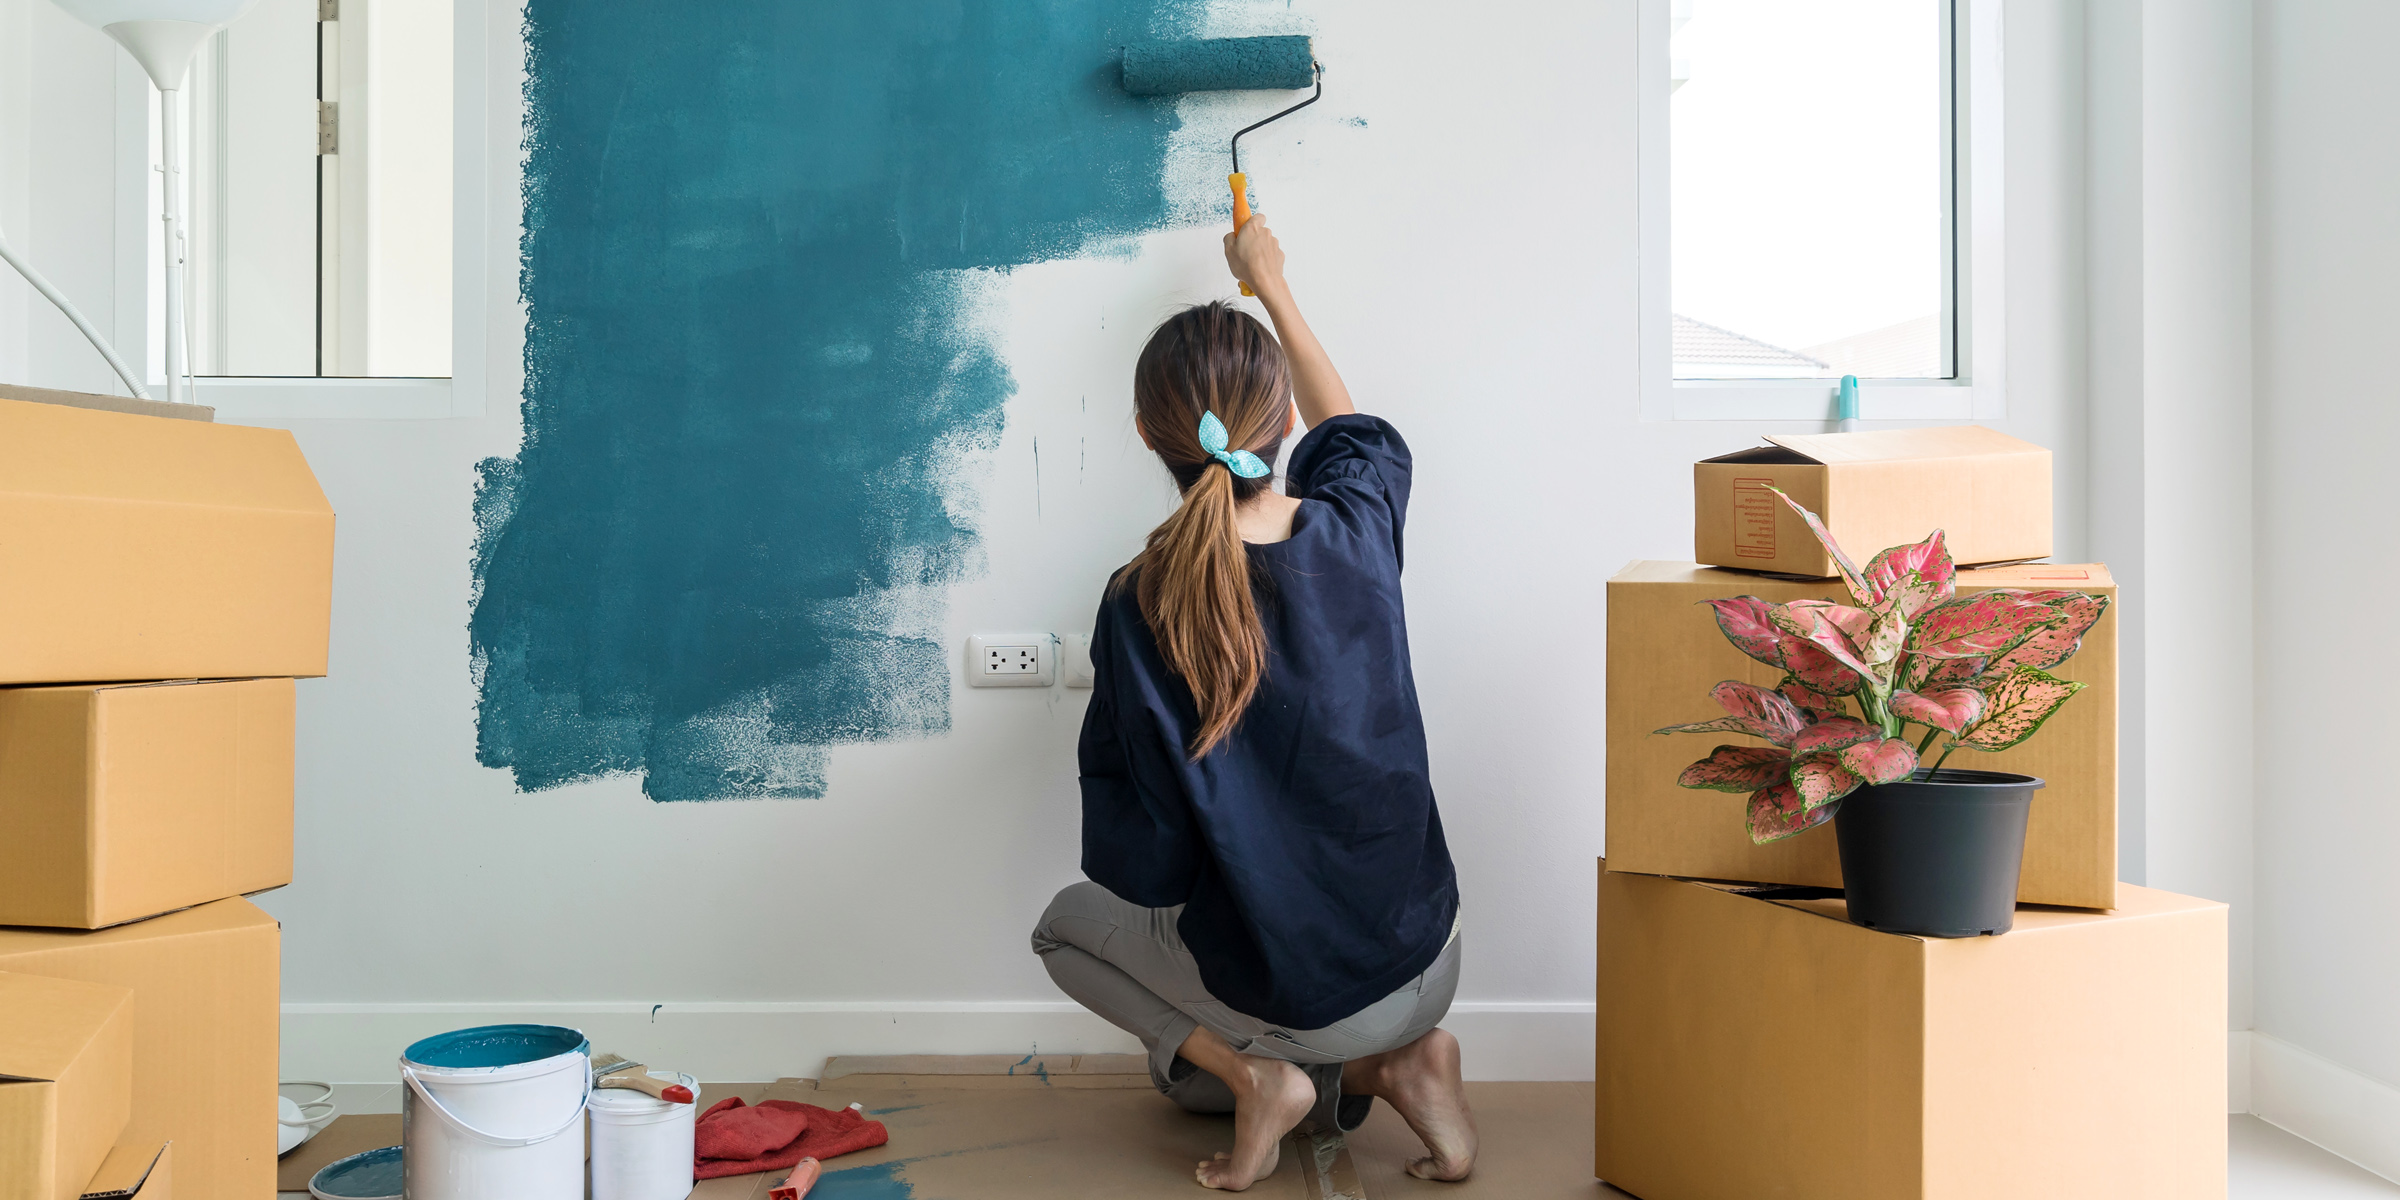 A woman painting a wall | Source: Shutterstock